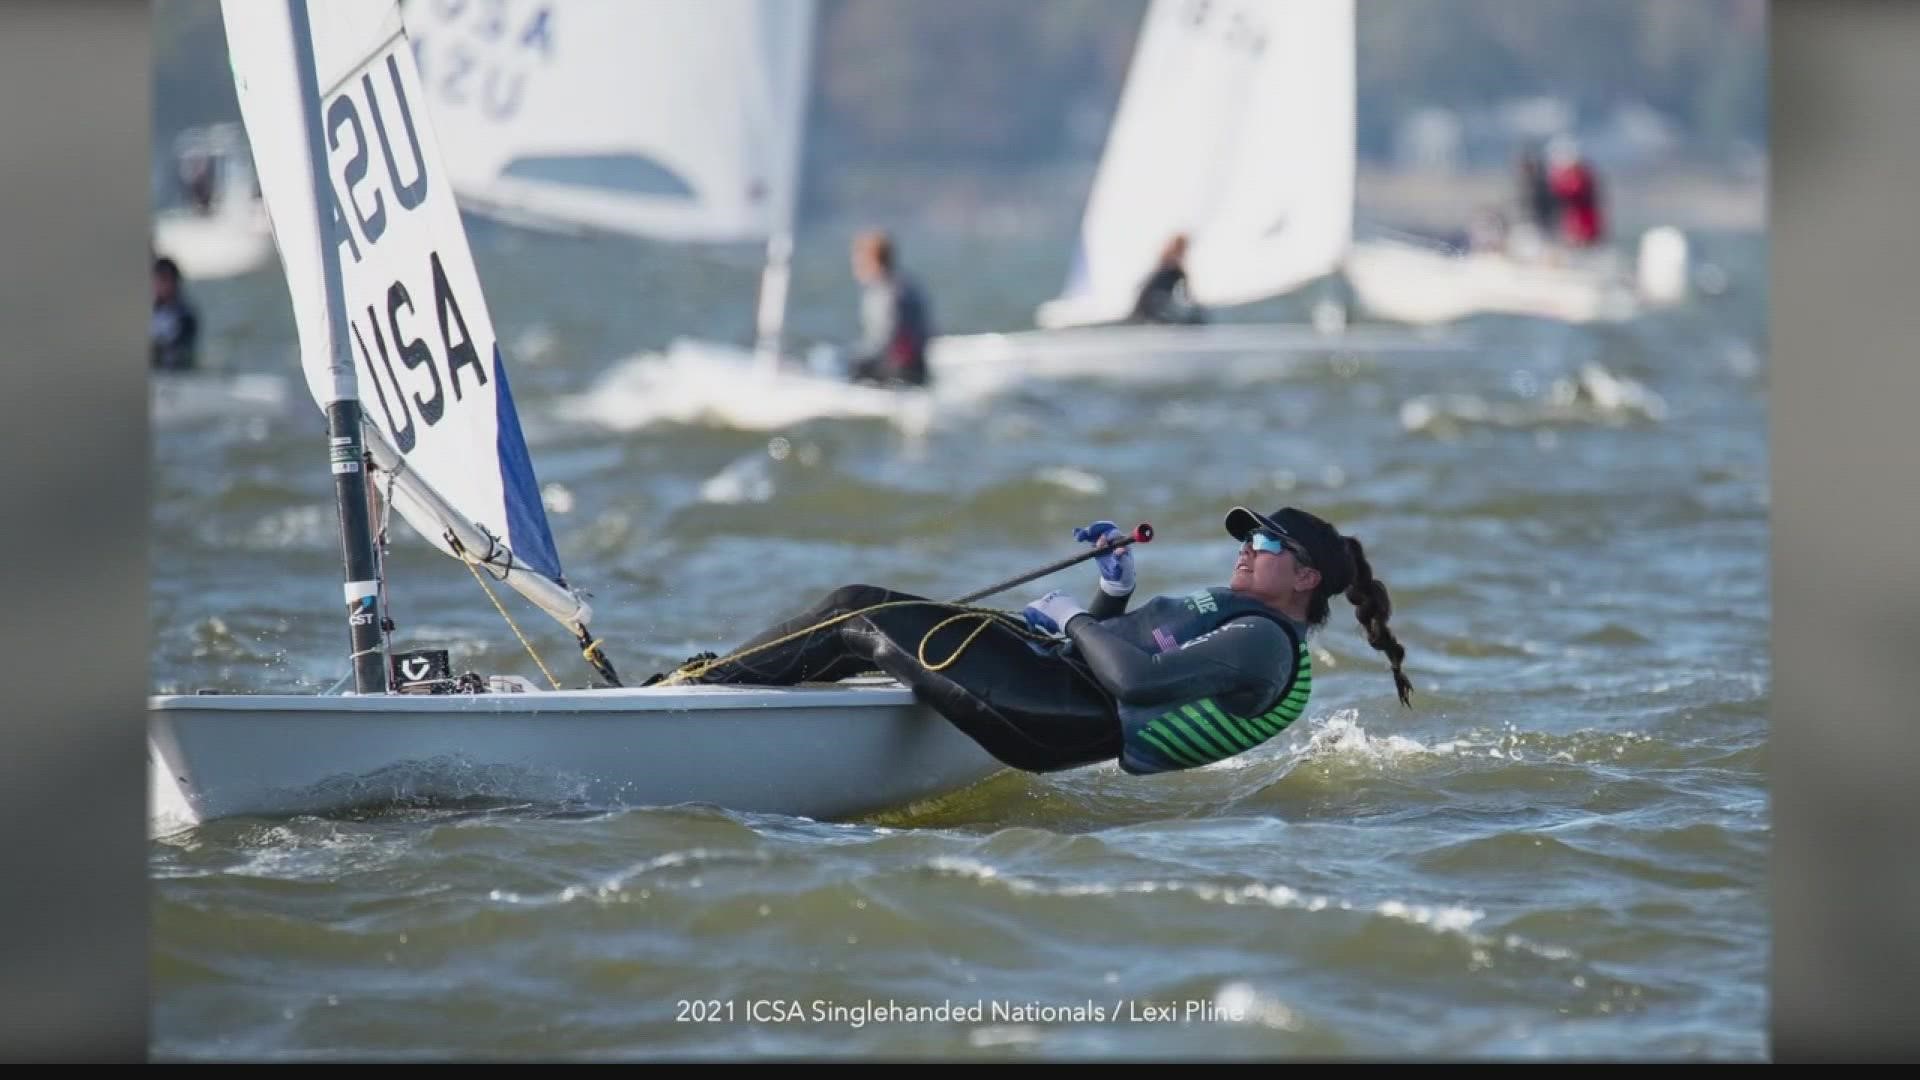 Charlotte Rose is a two-time collegiate national sailing champion and just graduated from Jacksonville University.